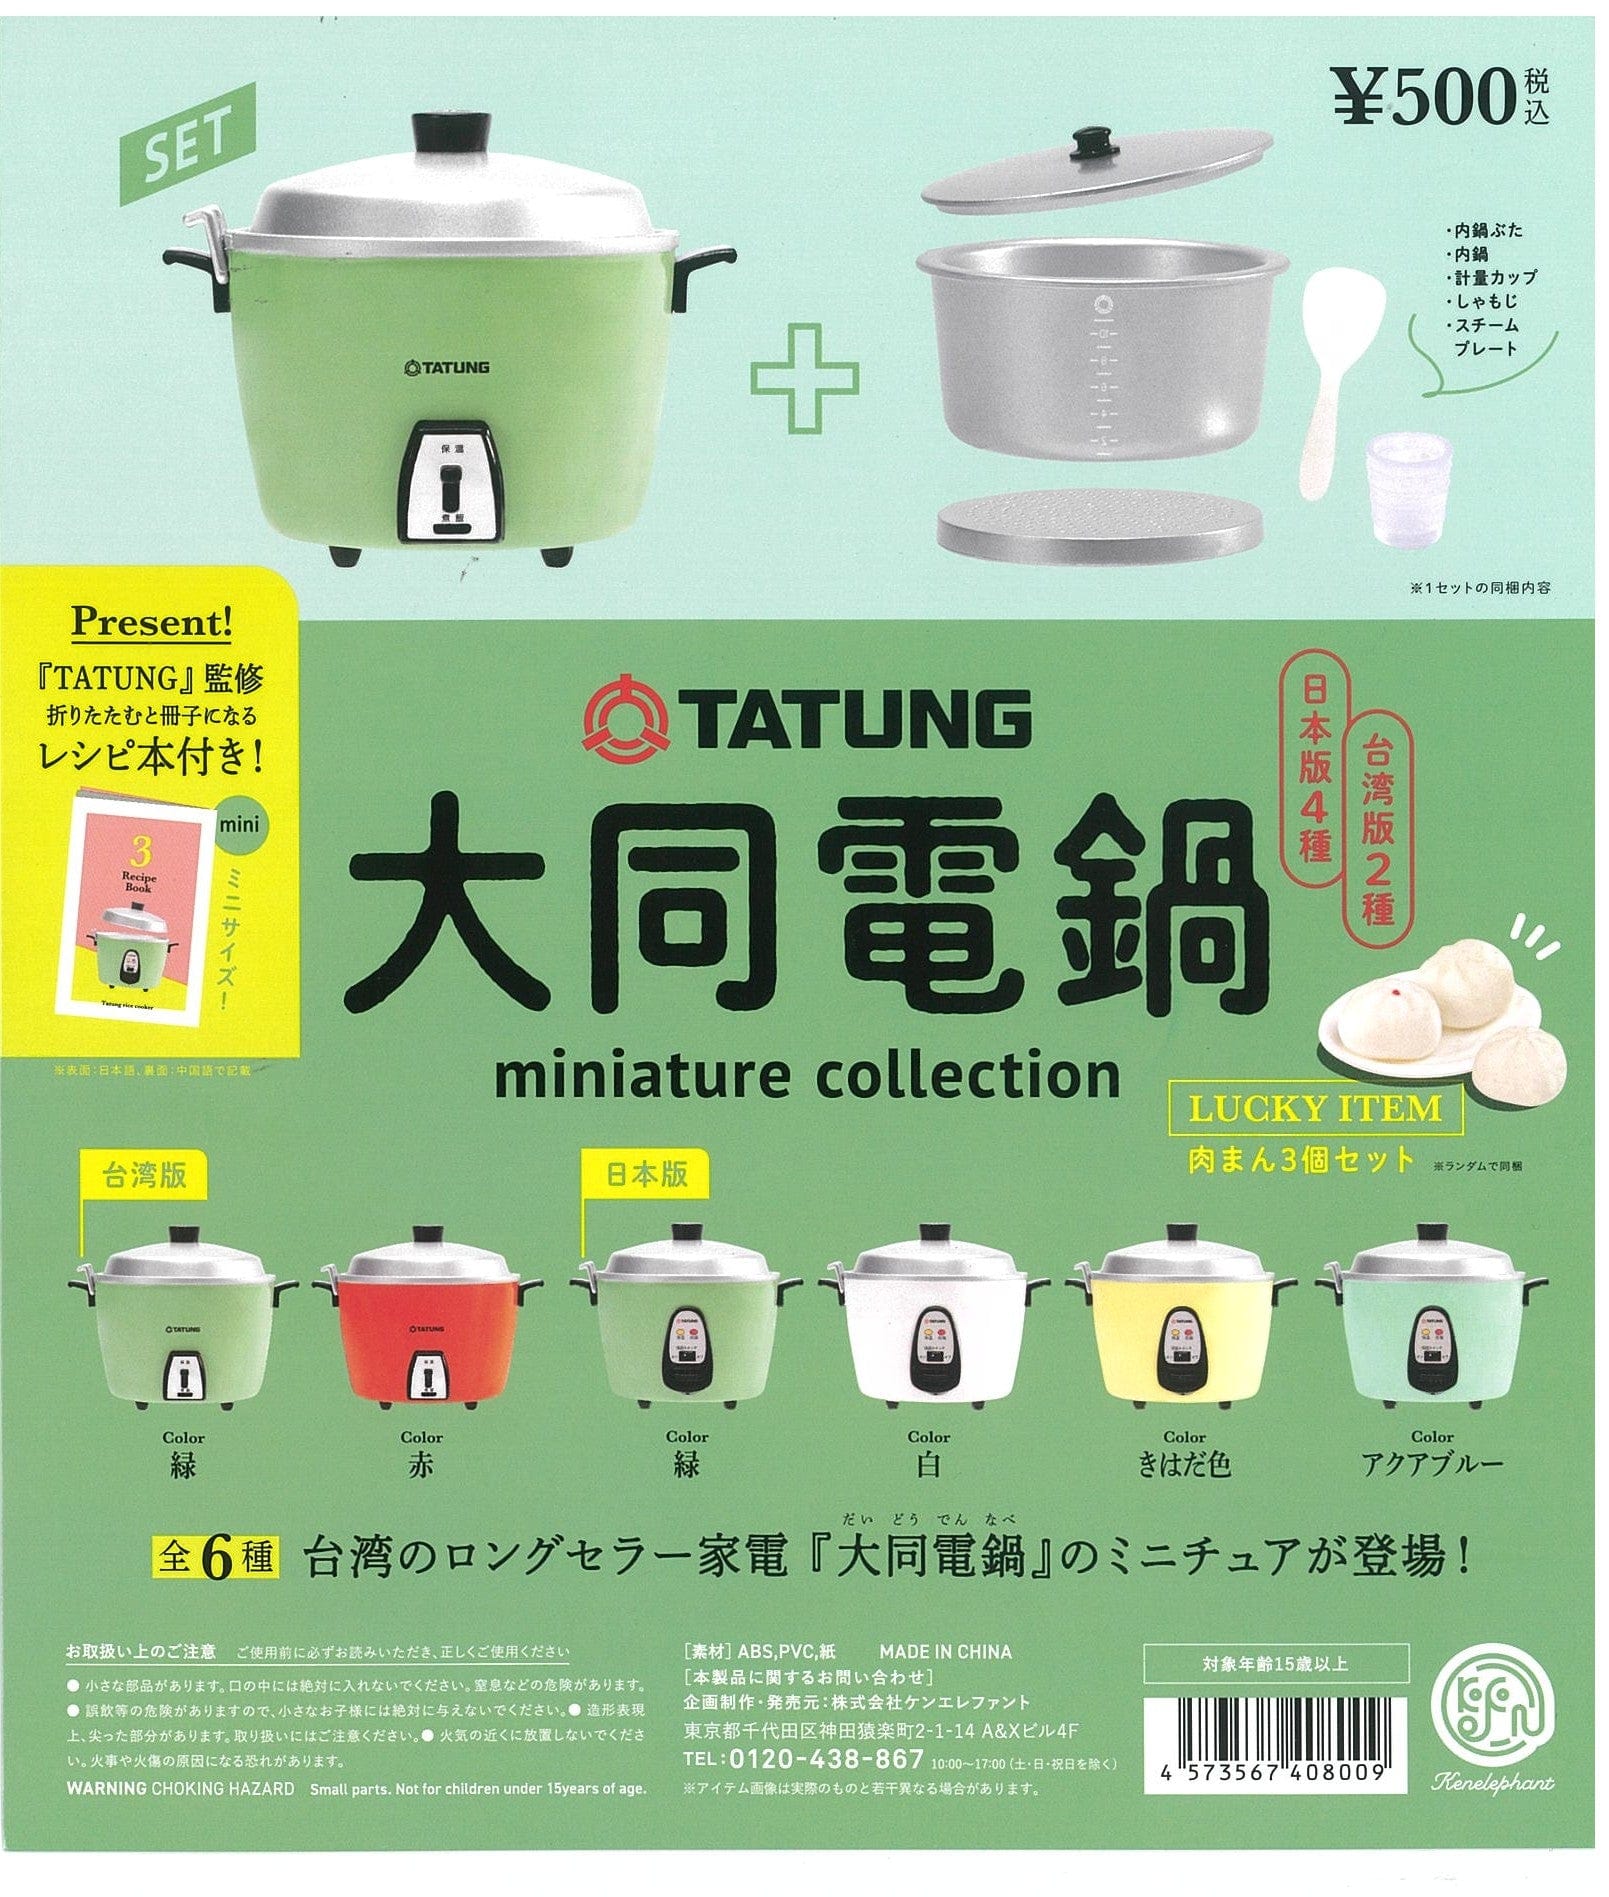 Kenelephant CP2143 Tatung Rice Cooker Miniature Collection